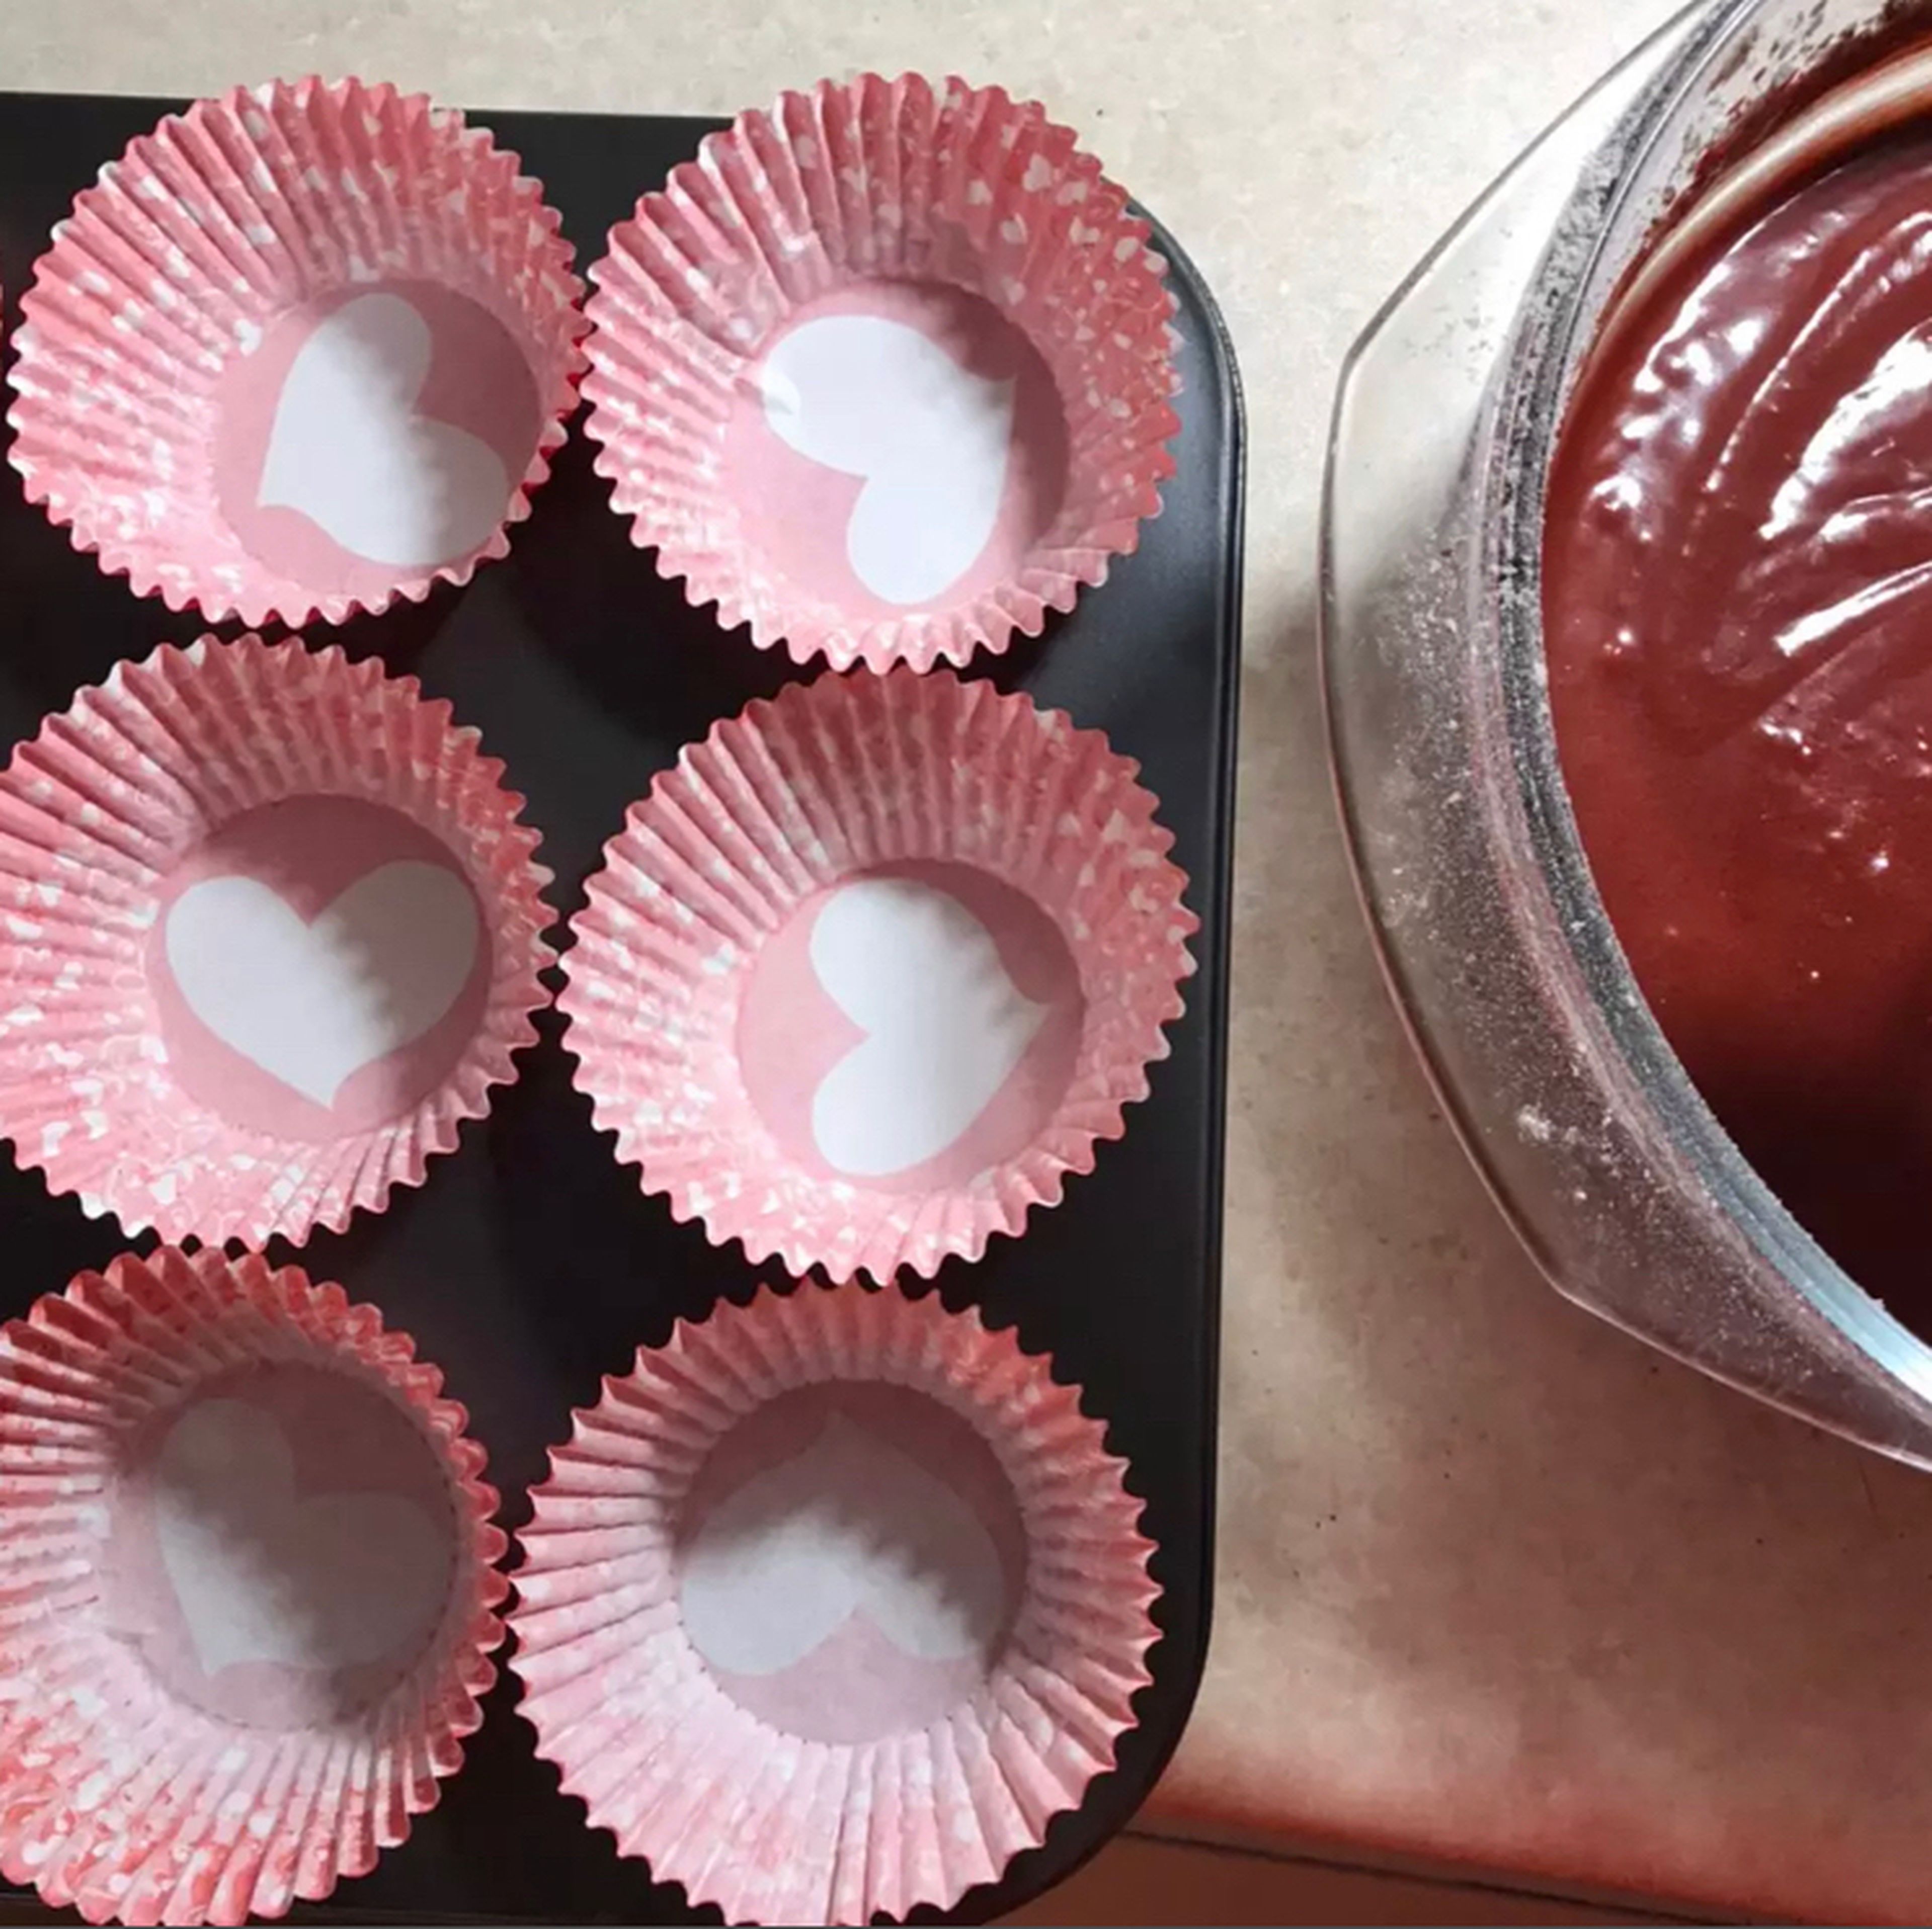 Pour into a muffin tin.